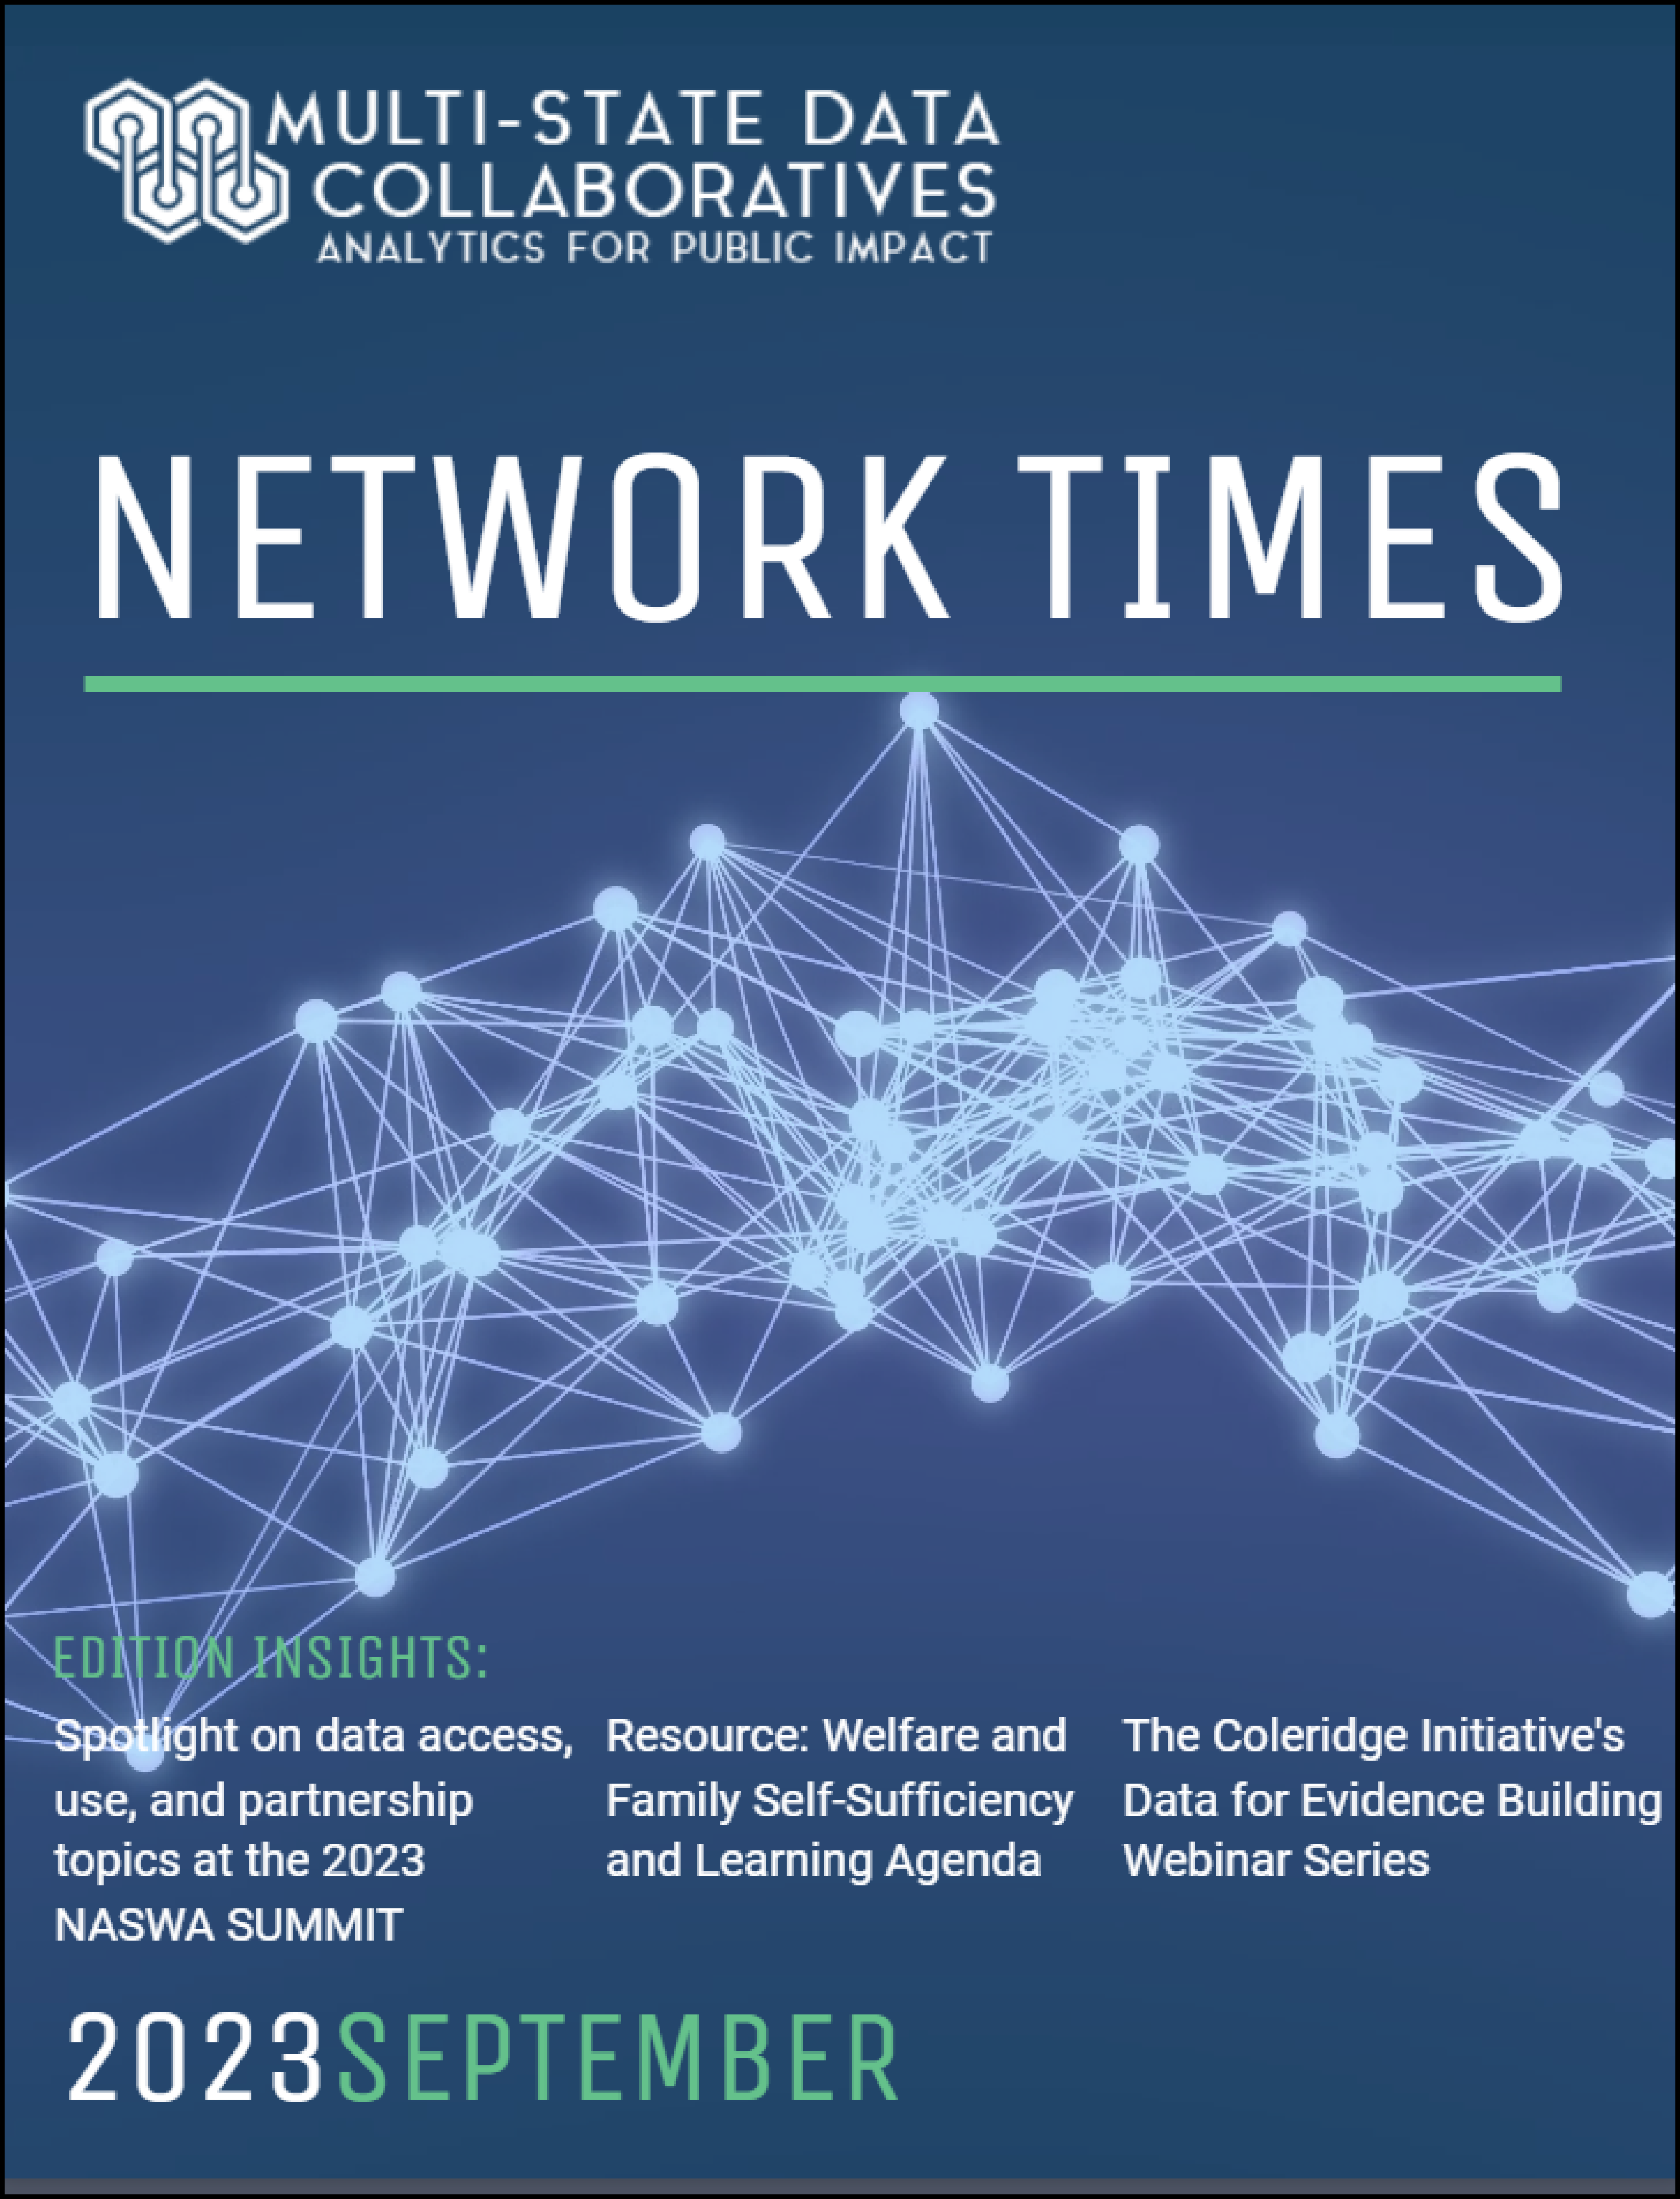 Multi-State Data Collaboratives Network Times - September 2023